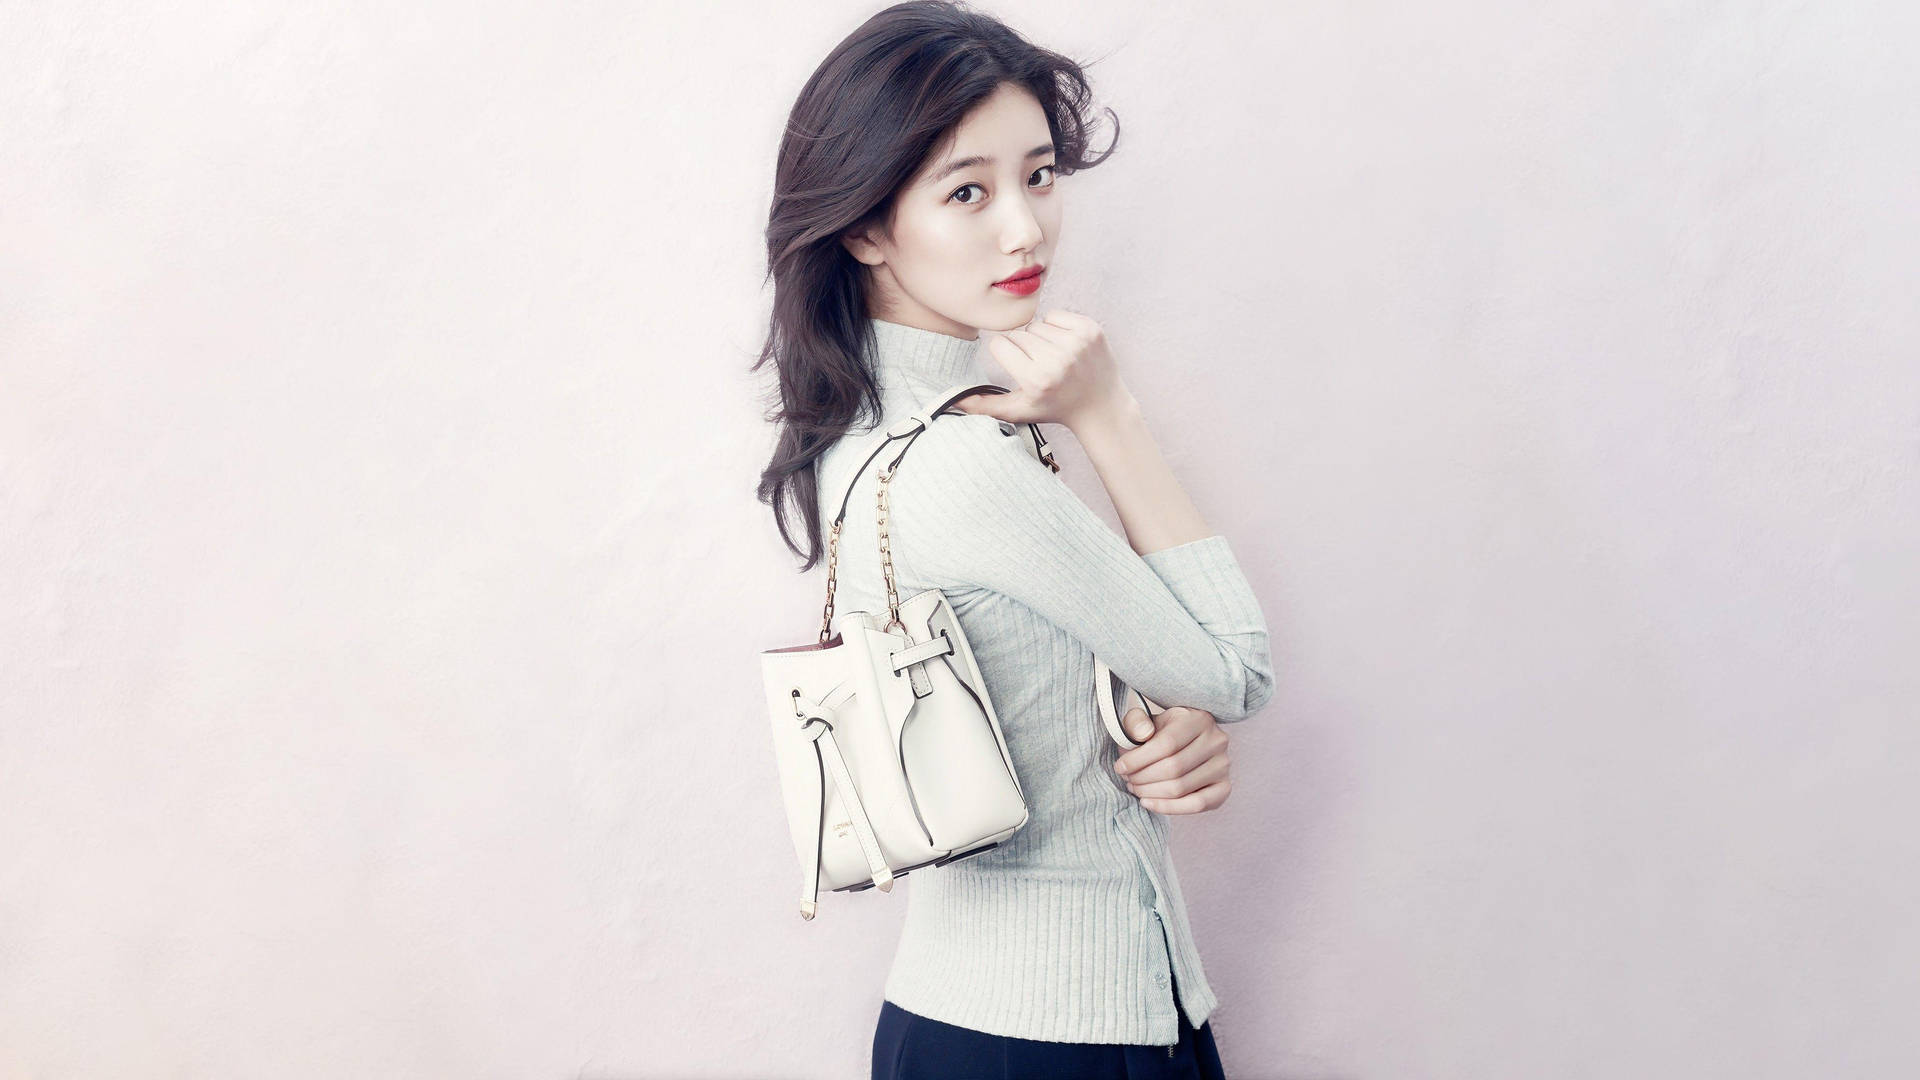 Bae Suzy With Bag Background